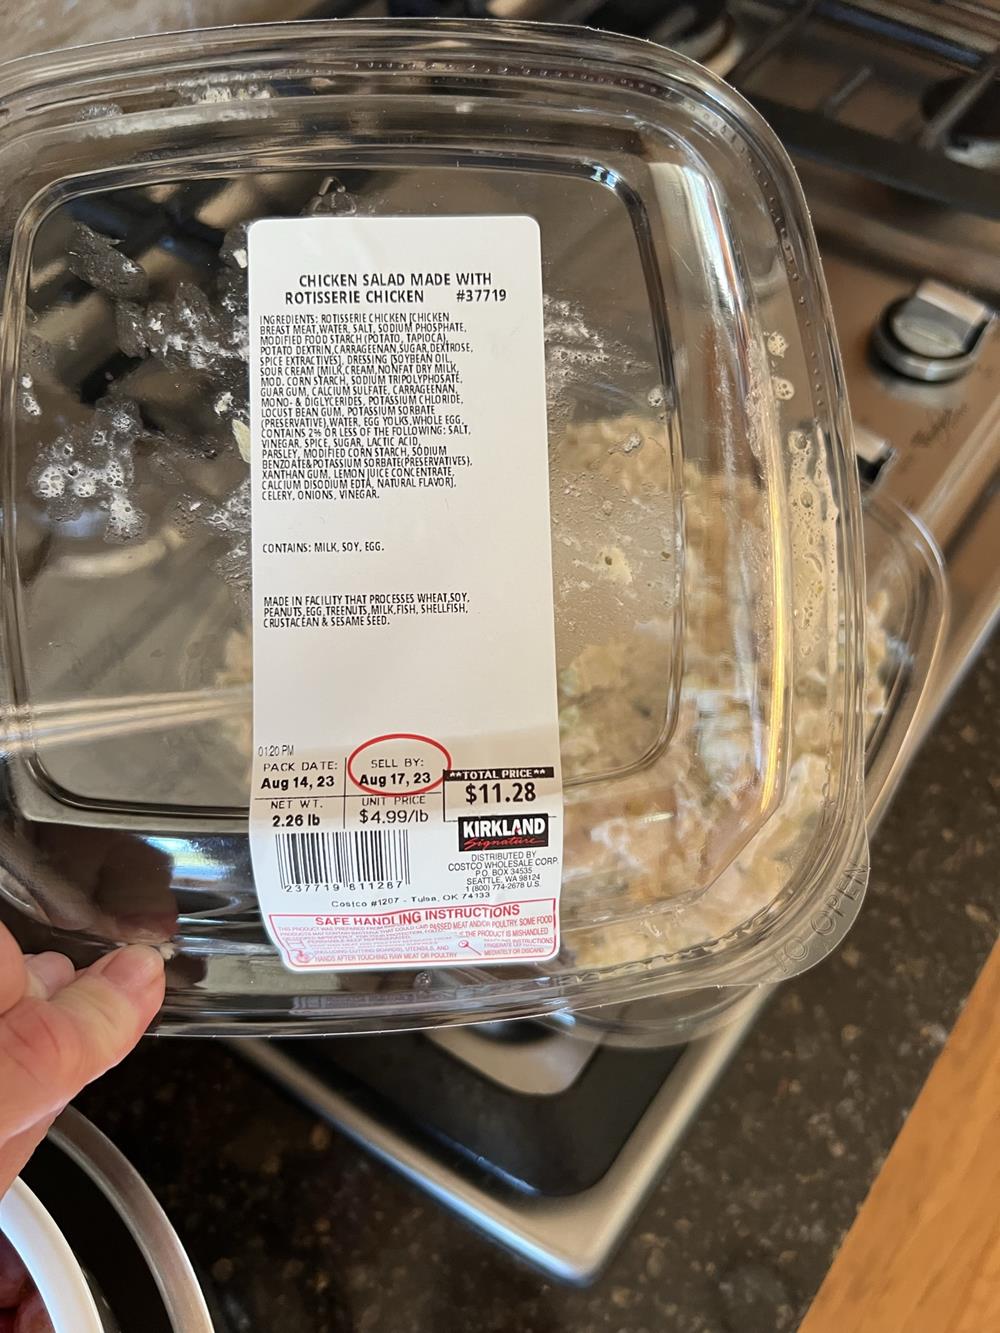 Costco chicken salad in a clear plastic container